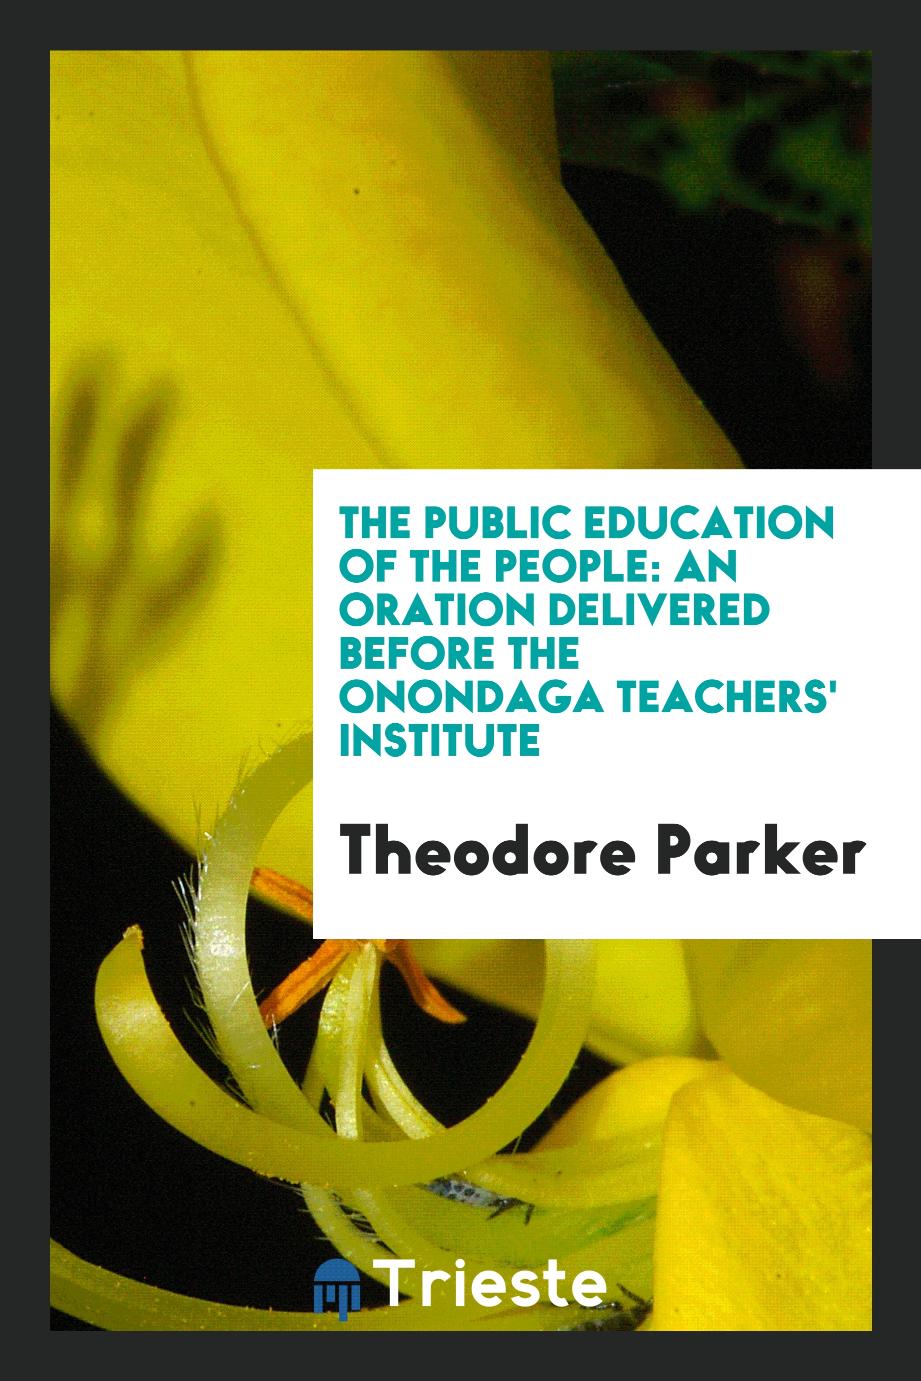 The Public Education of the People: An Oration Delivered Before the Onondaga Teachers' Institute